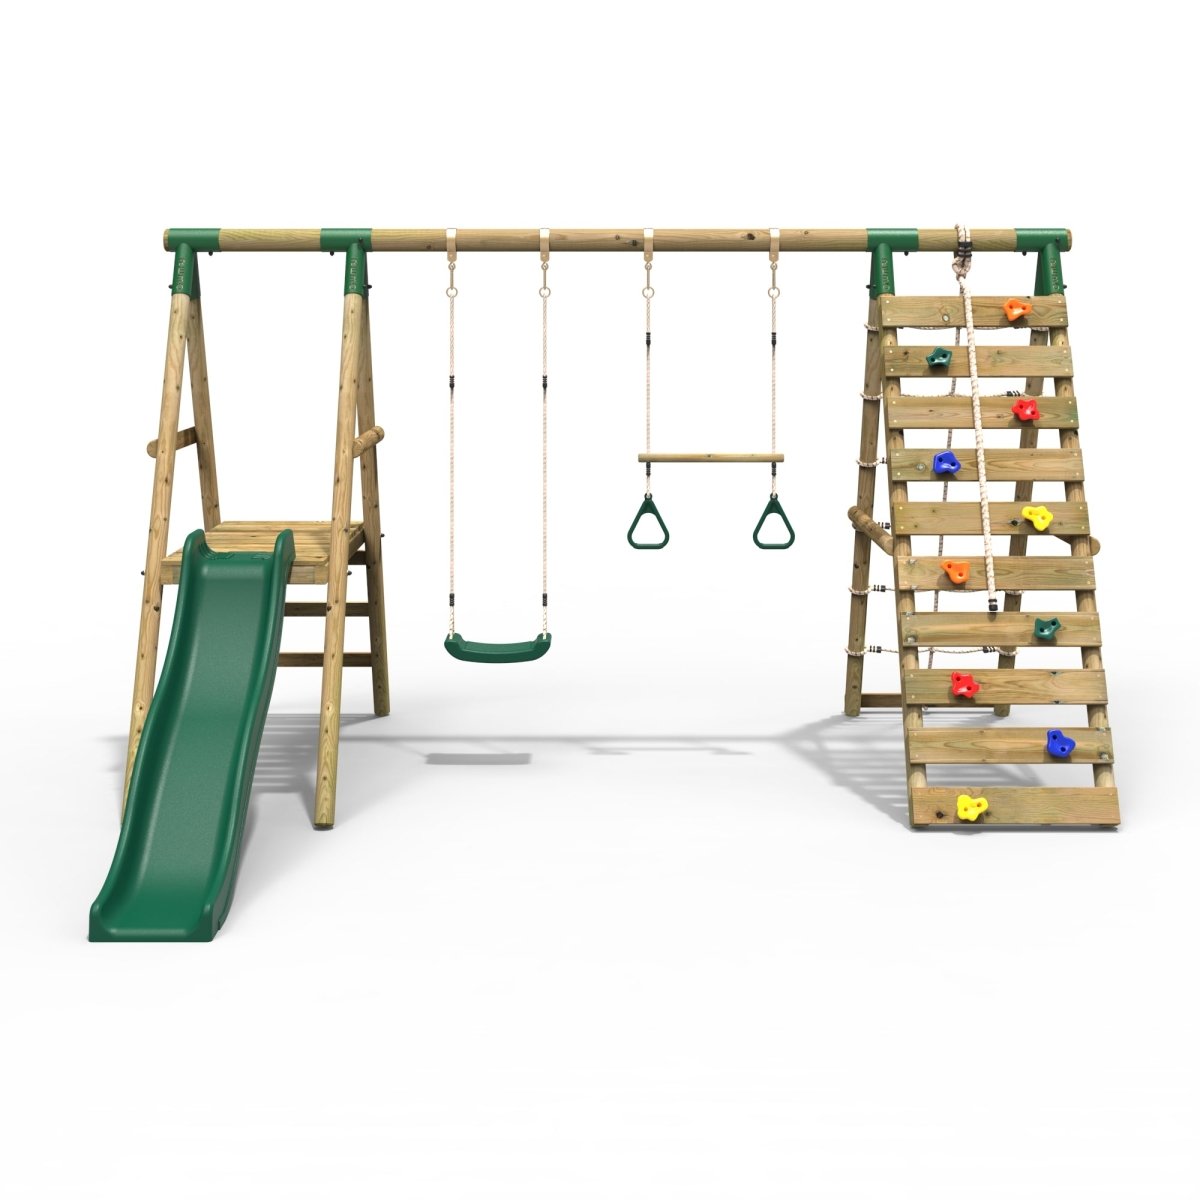 Rebo Wooden Swing Set with Deck and Slide plus Up and Over Climbing Wall - Jasper